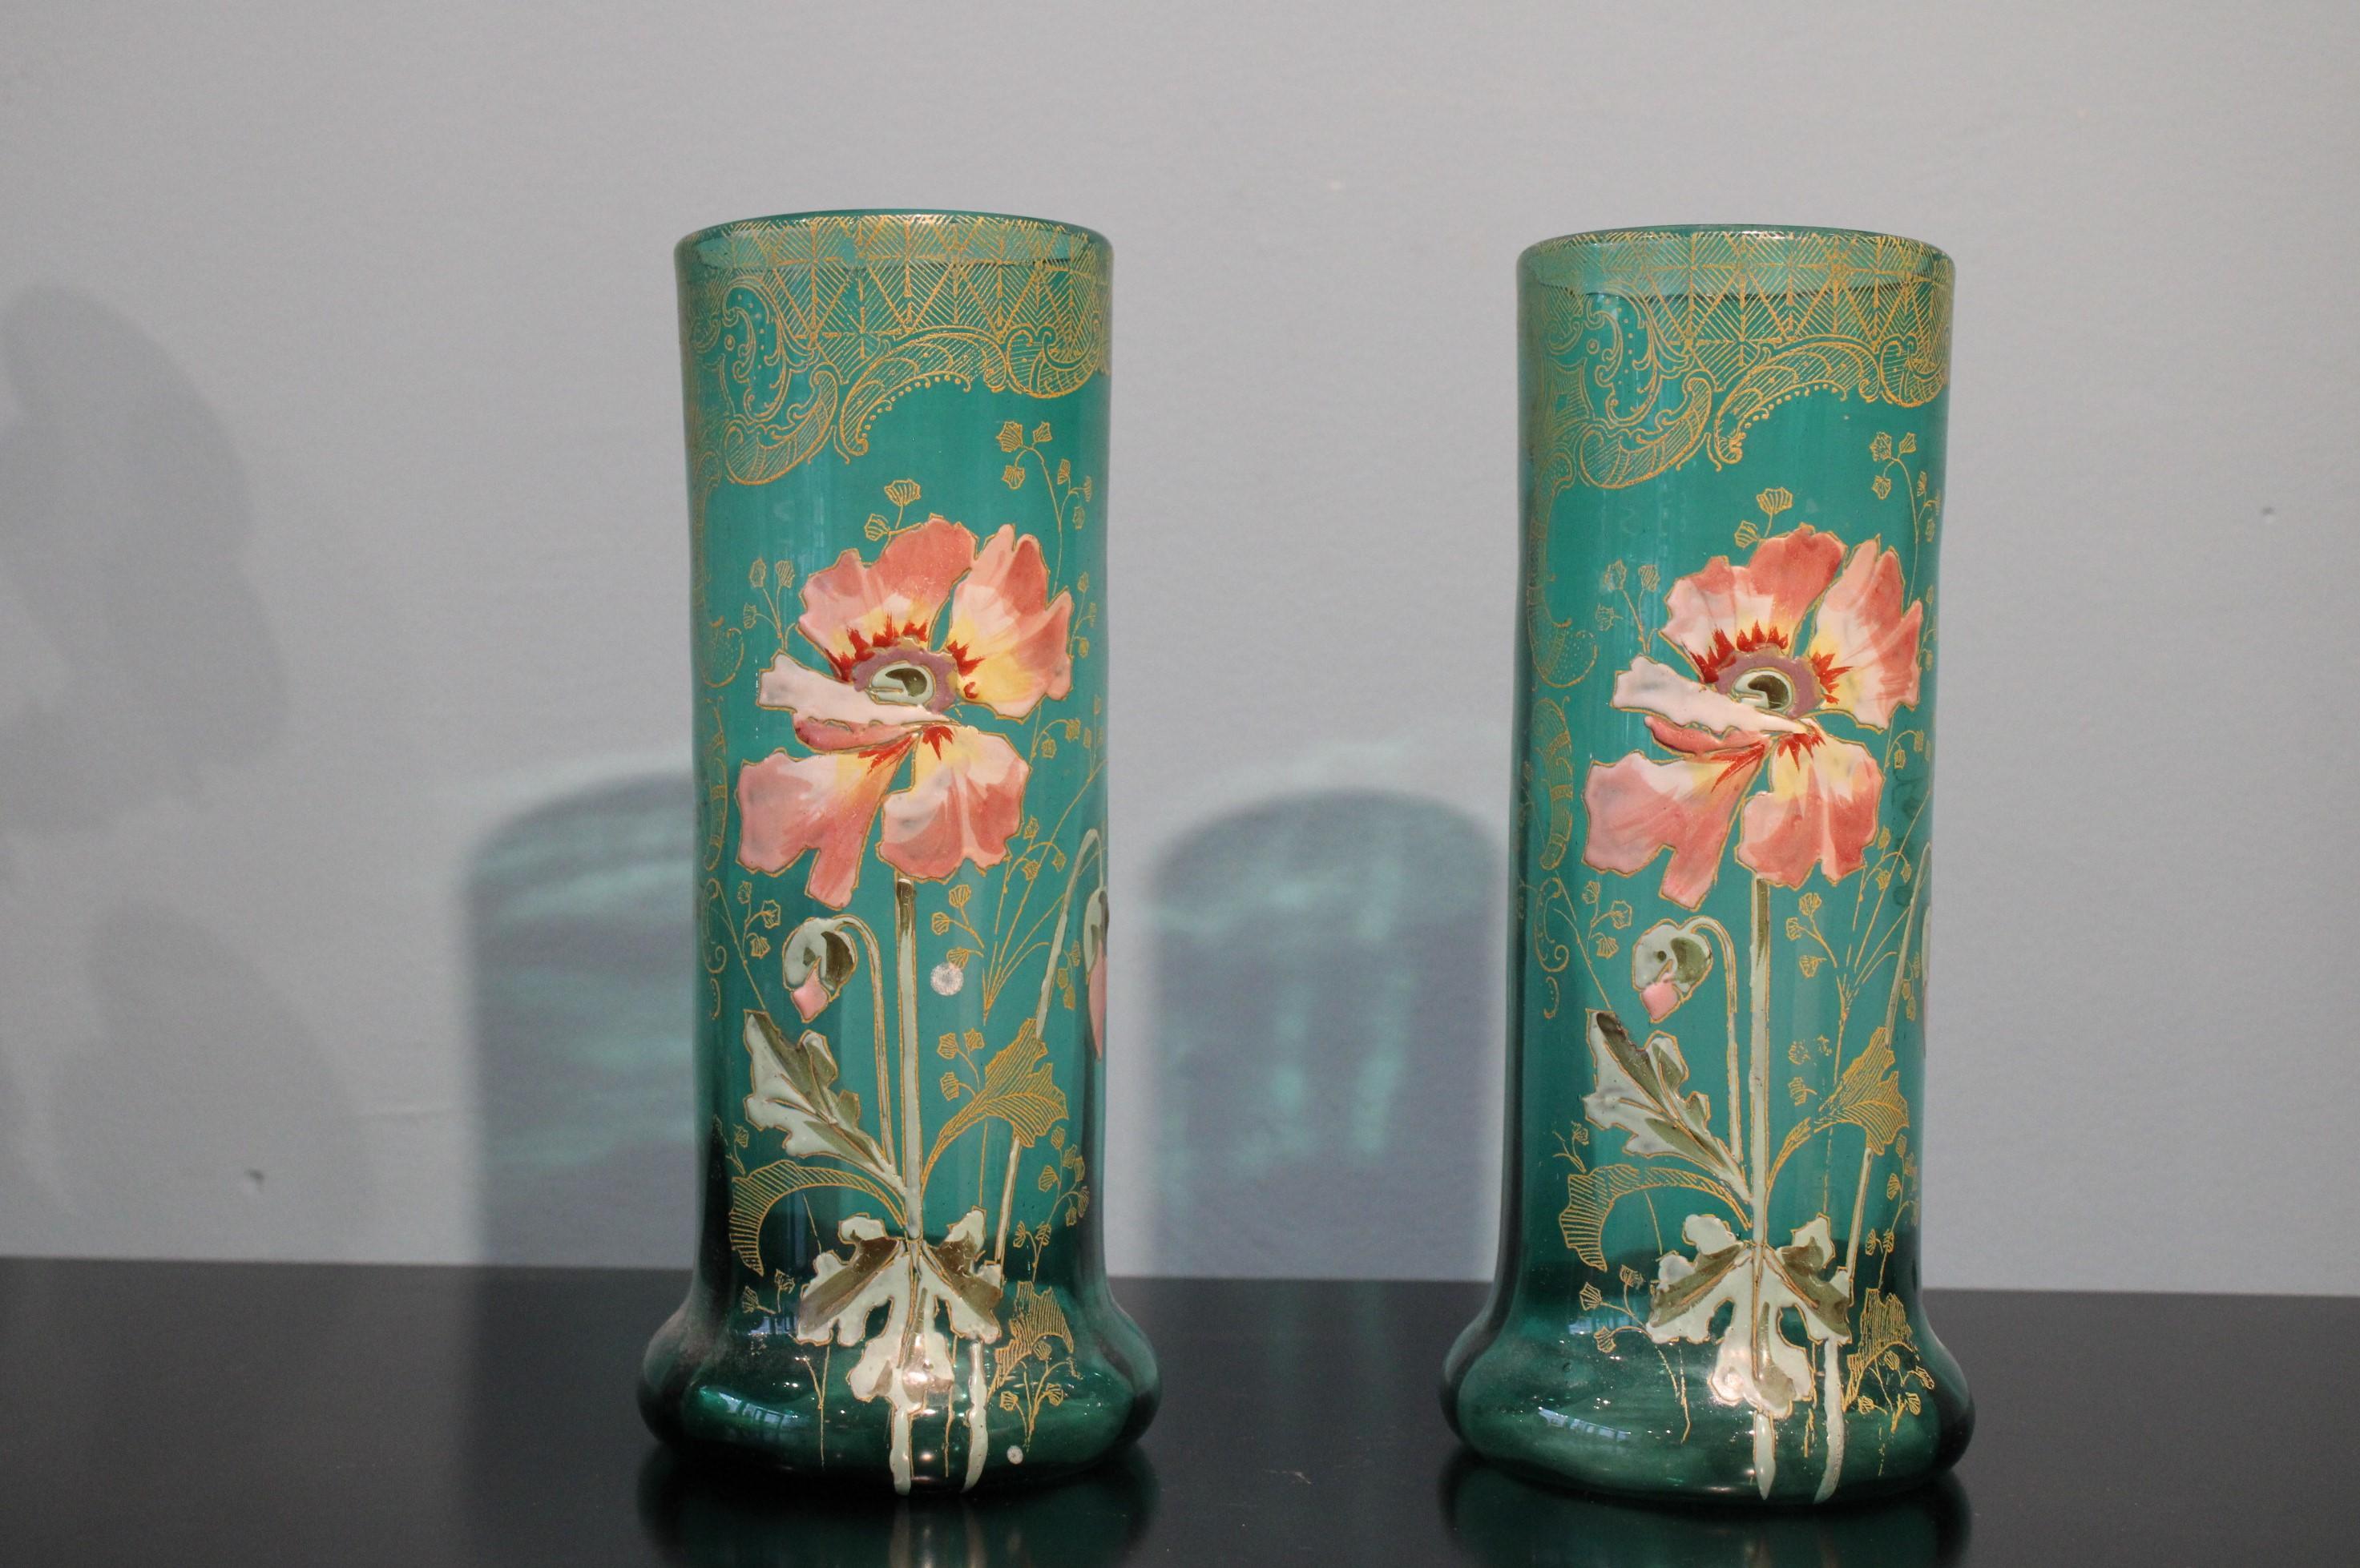 Pair of blue glass vases, Art Nouveau style.
Circa 1900
Enamelled and gilded decor.